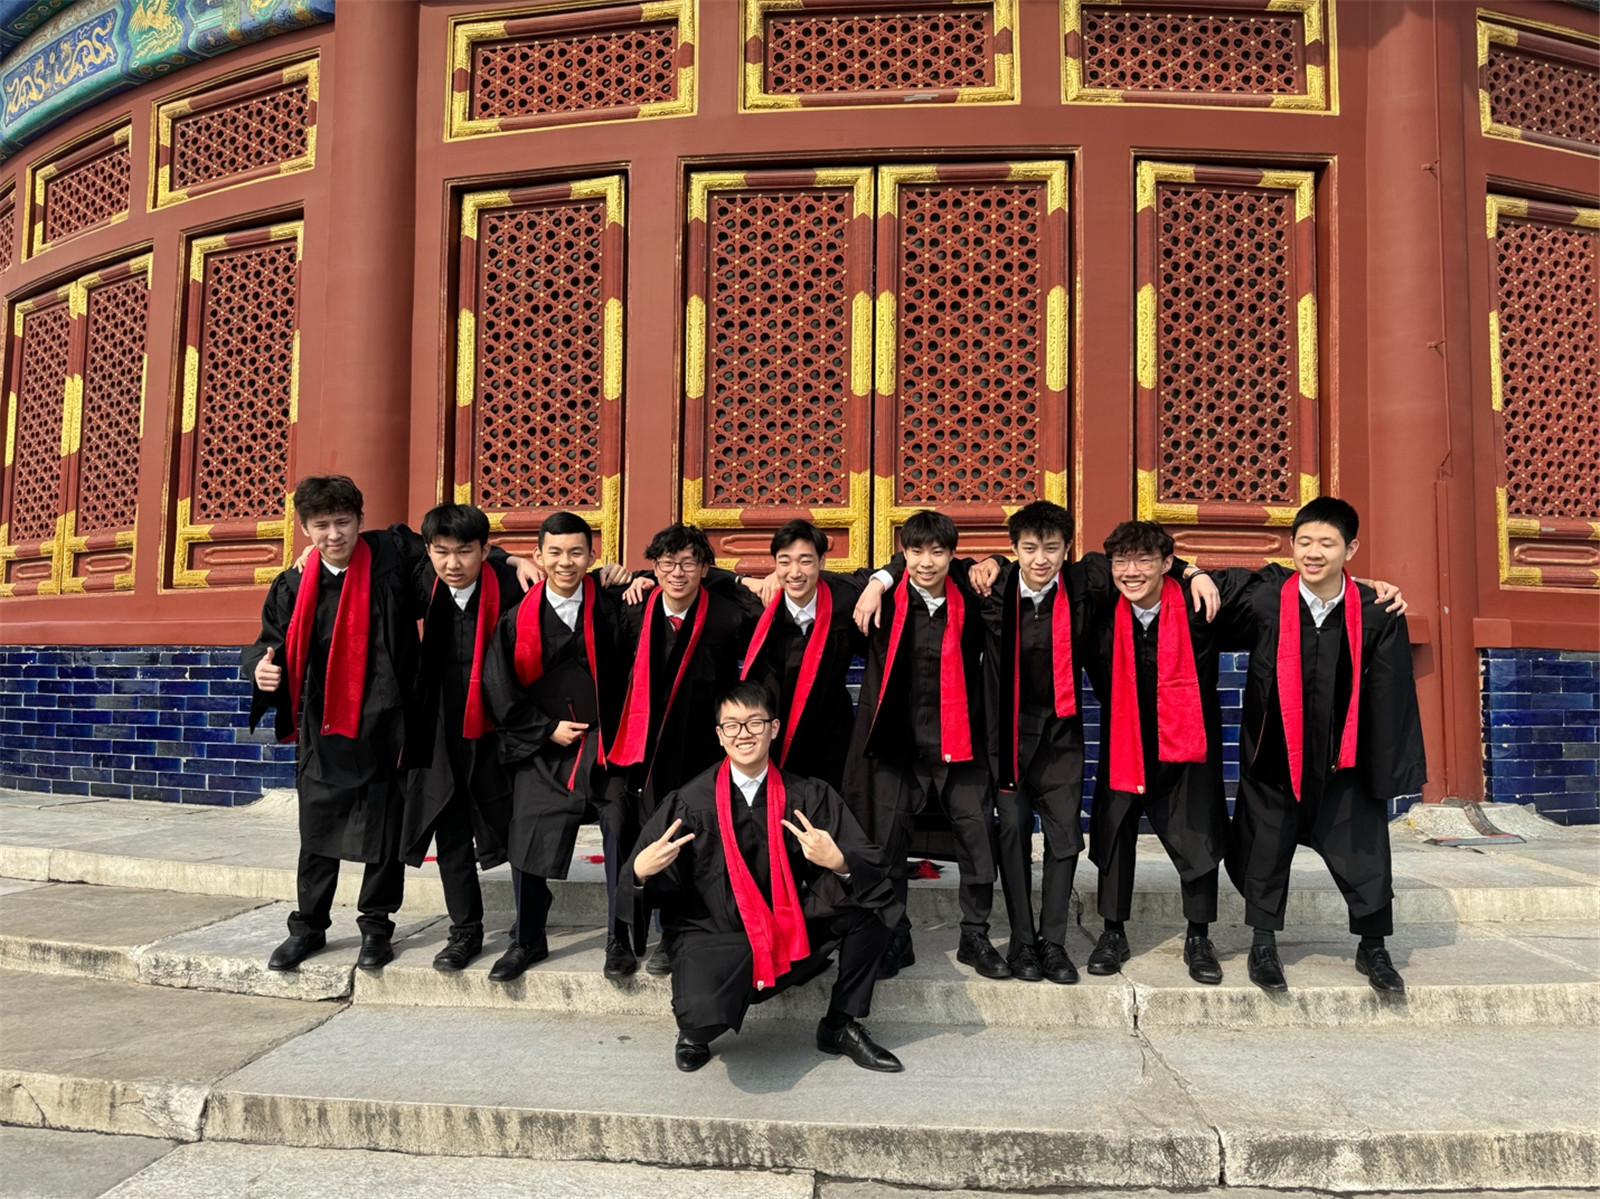 Temple of Heaven during the last day of school